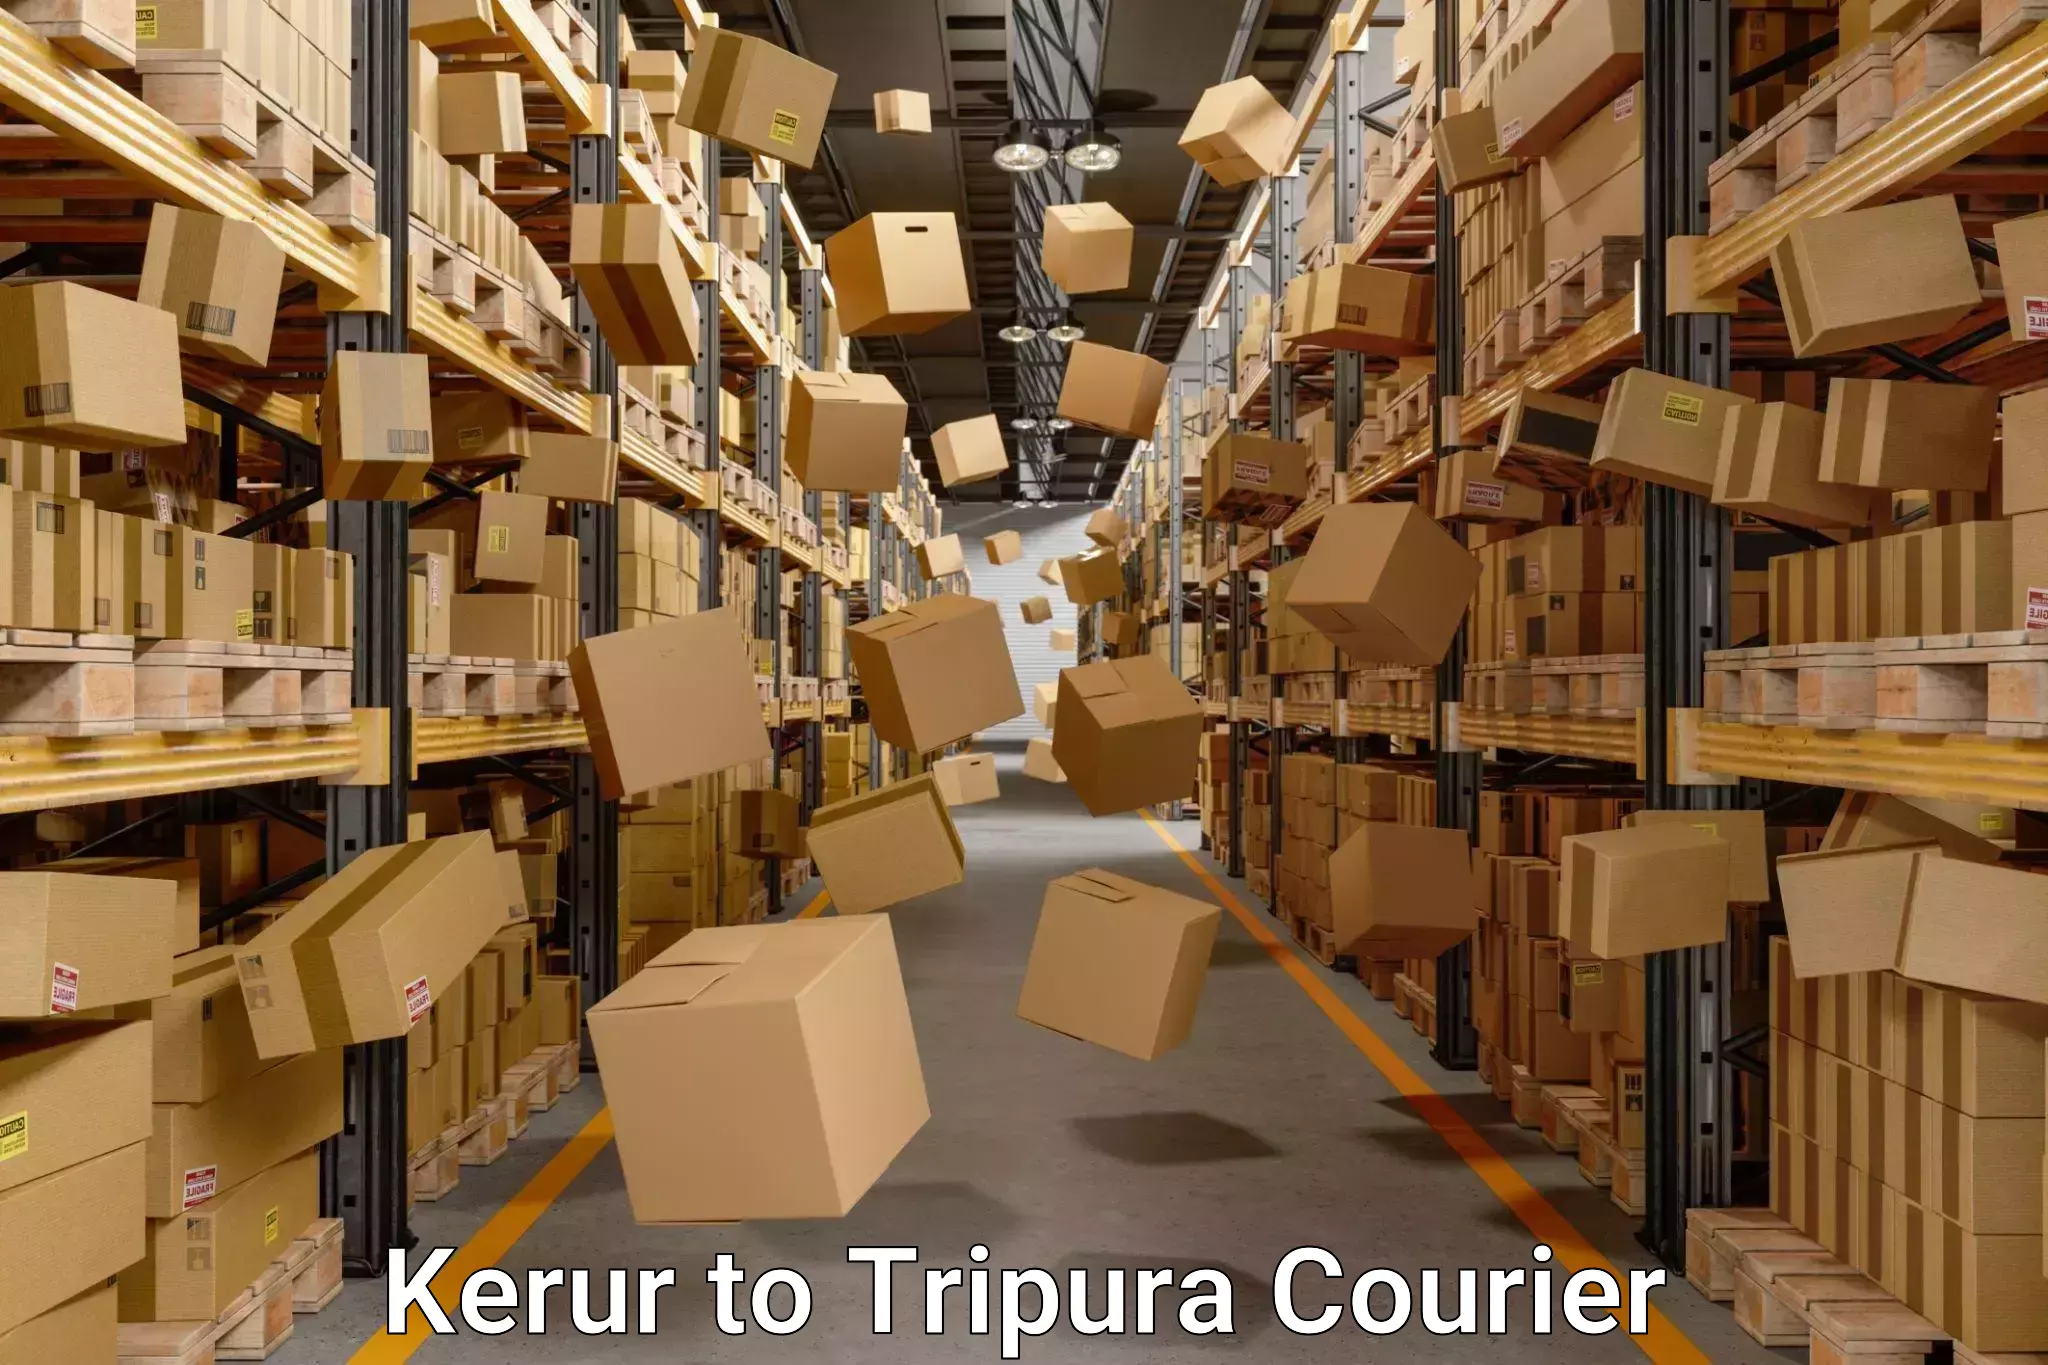 Reliable movers Kerur to Udaipur Tripura